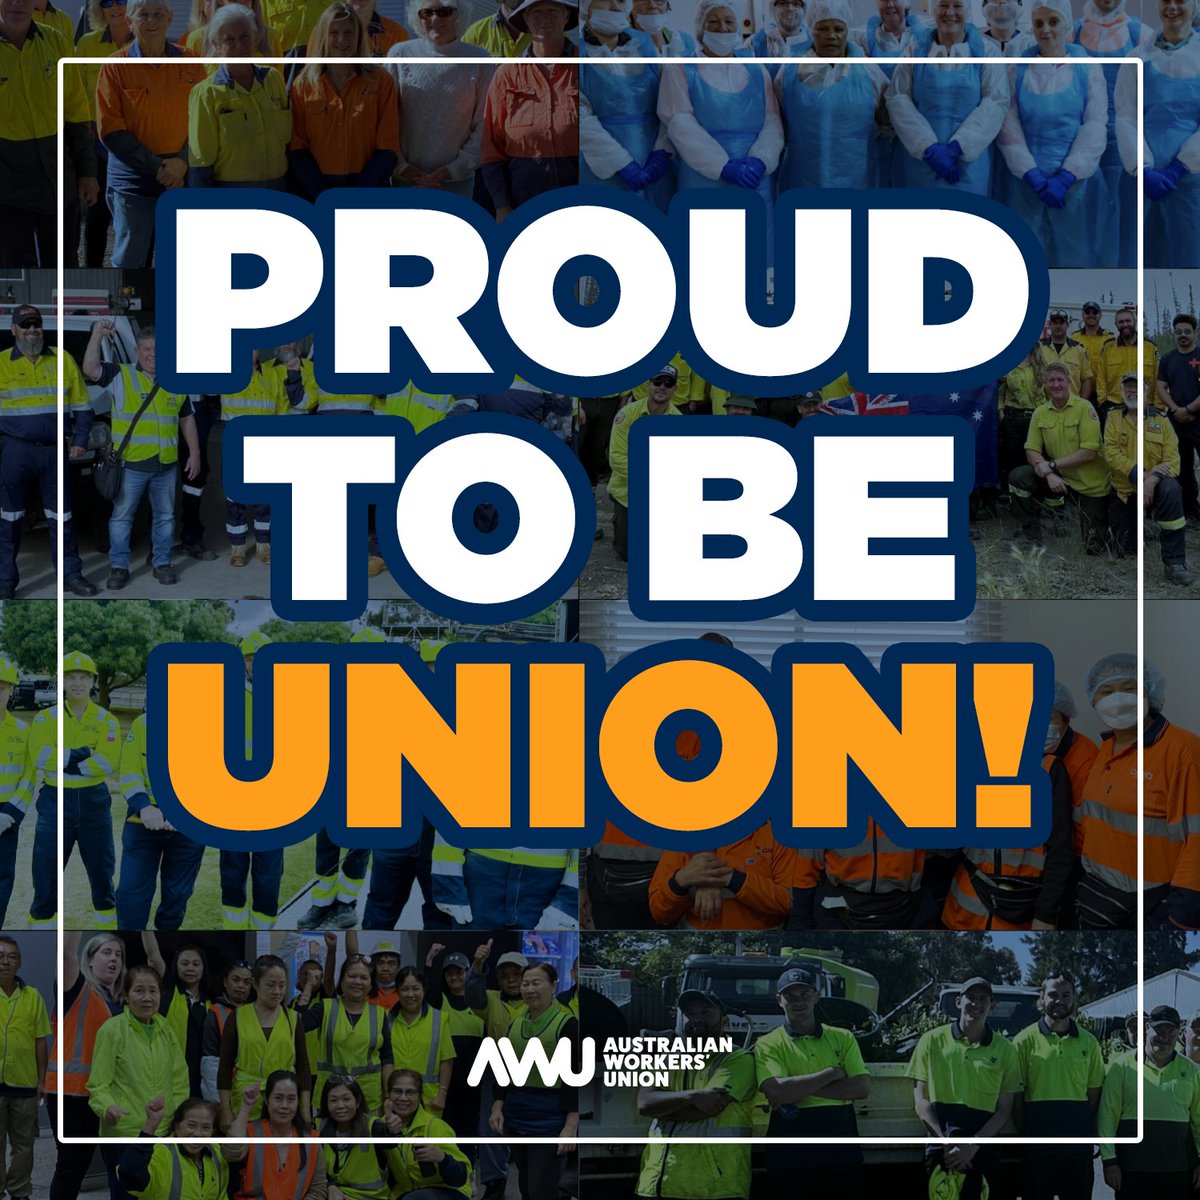 Like and share if you're proud to be union like us!